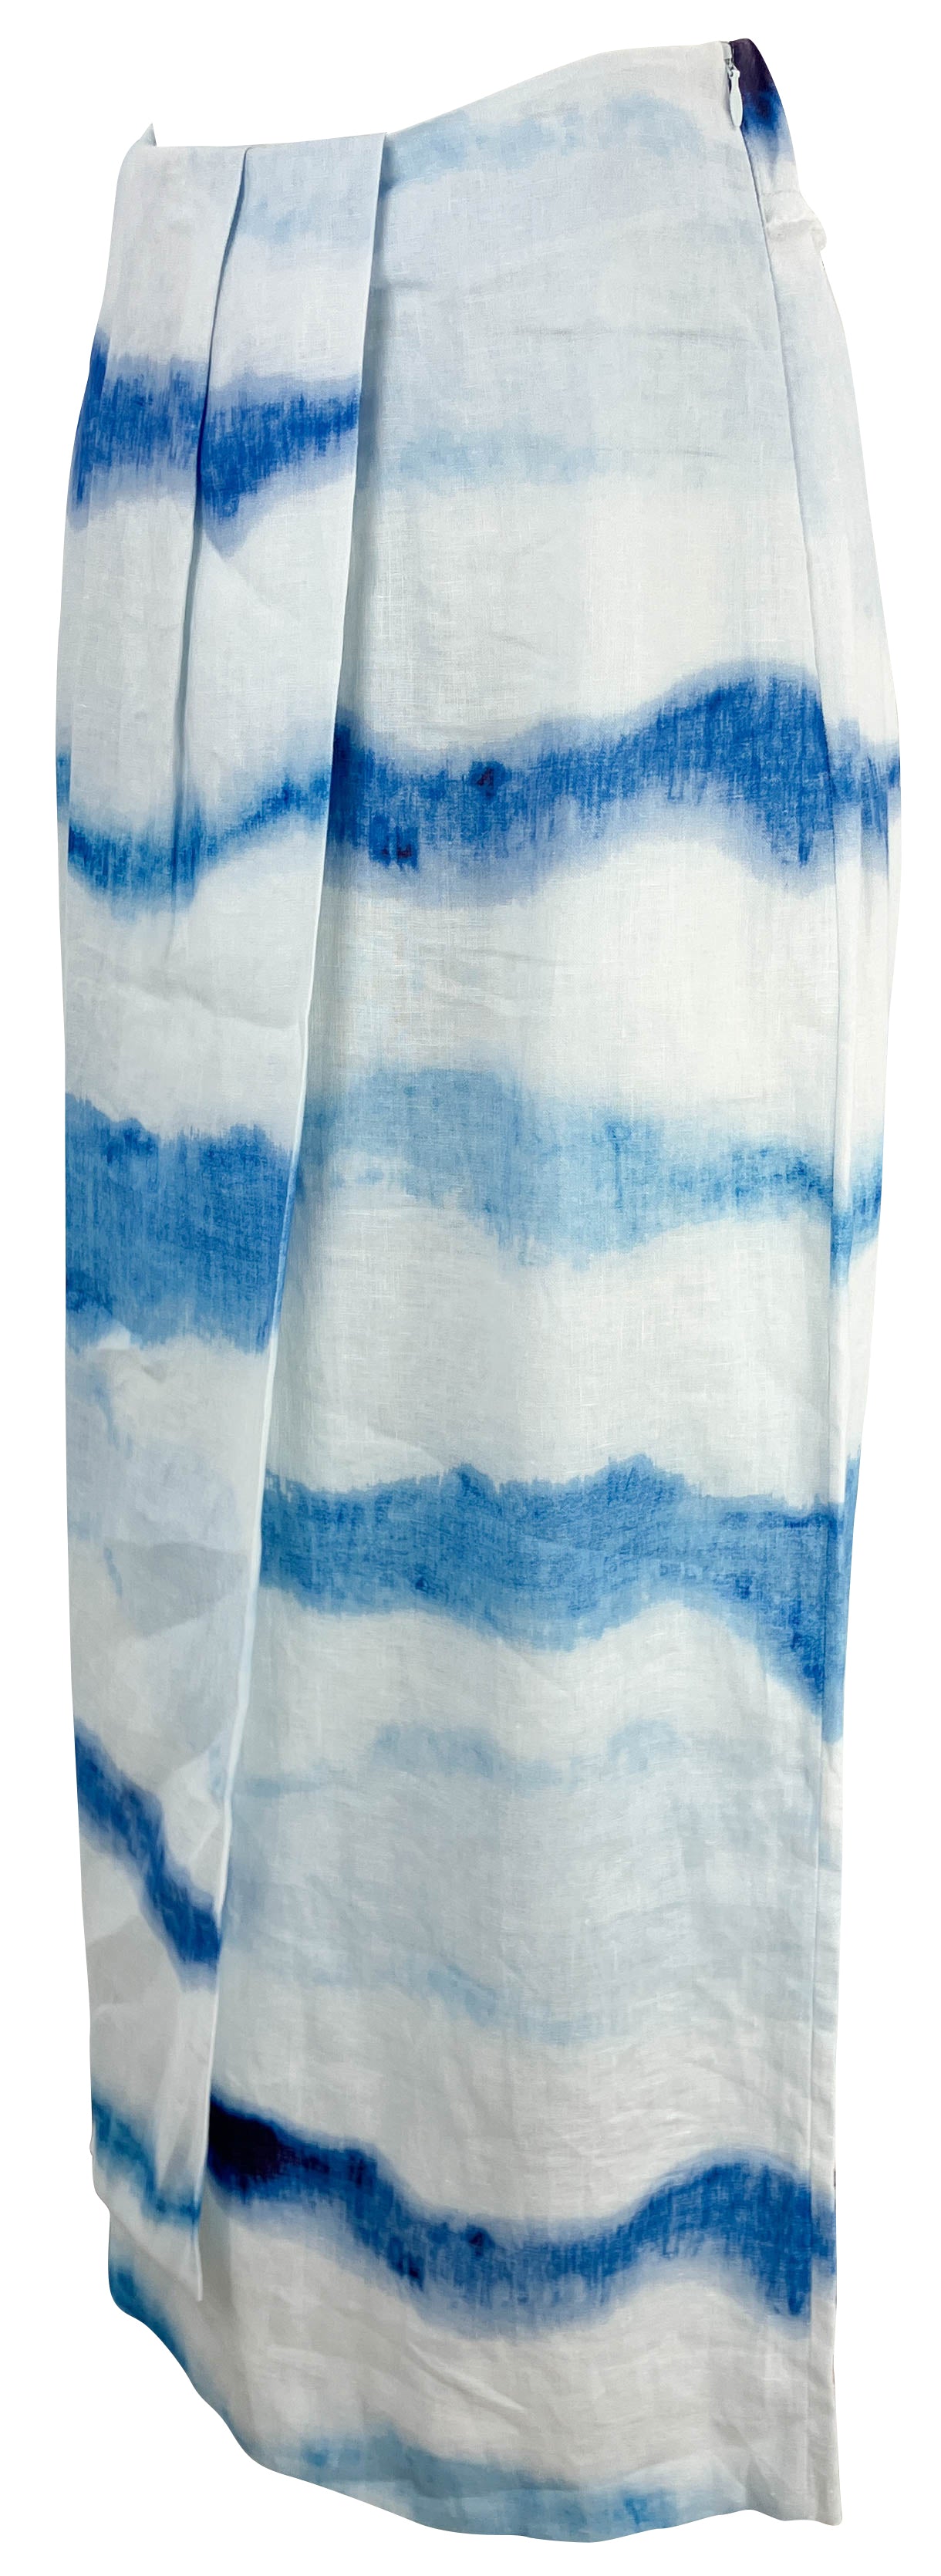 Dorothee Schumacher Blue Seduction Skirt in Blue Waves - Discounts on Dorothee Schumacher at UAL